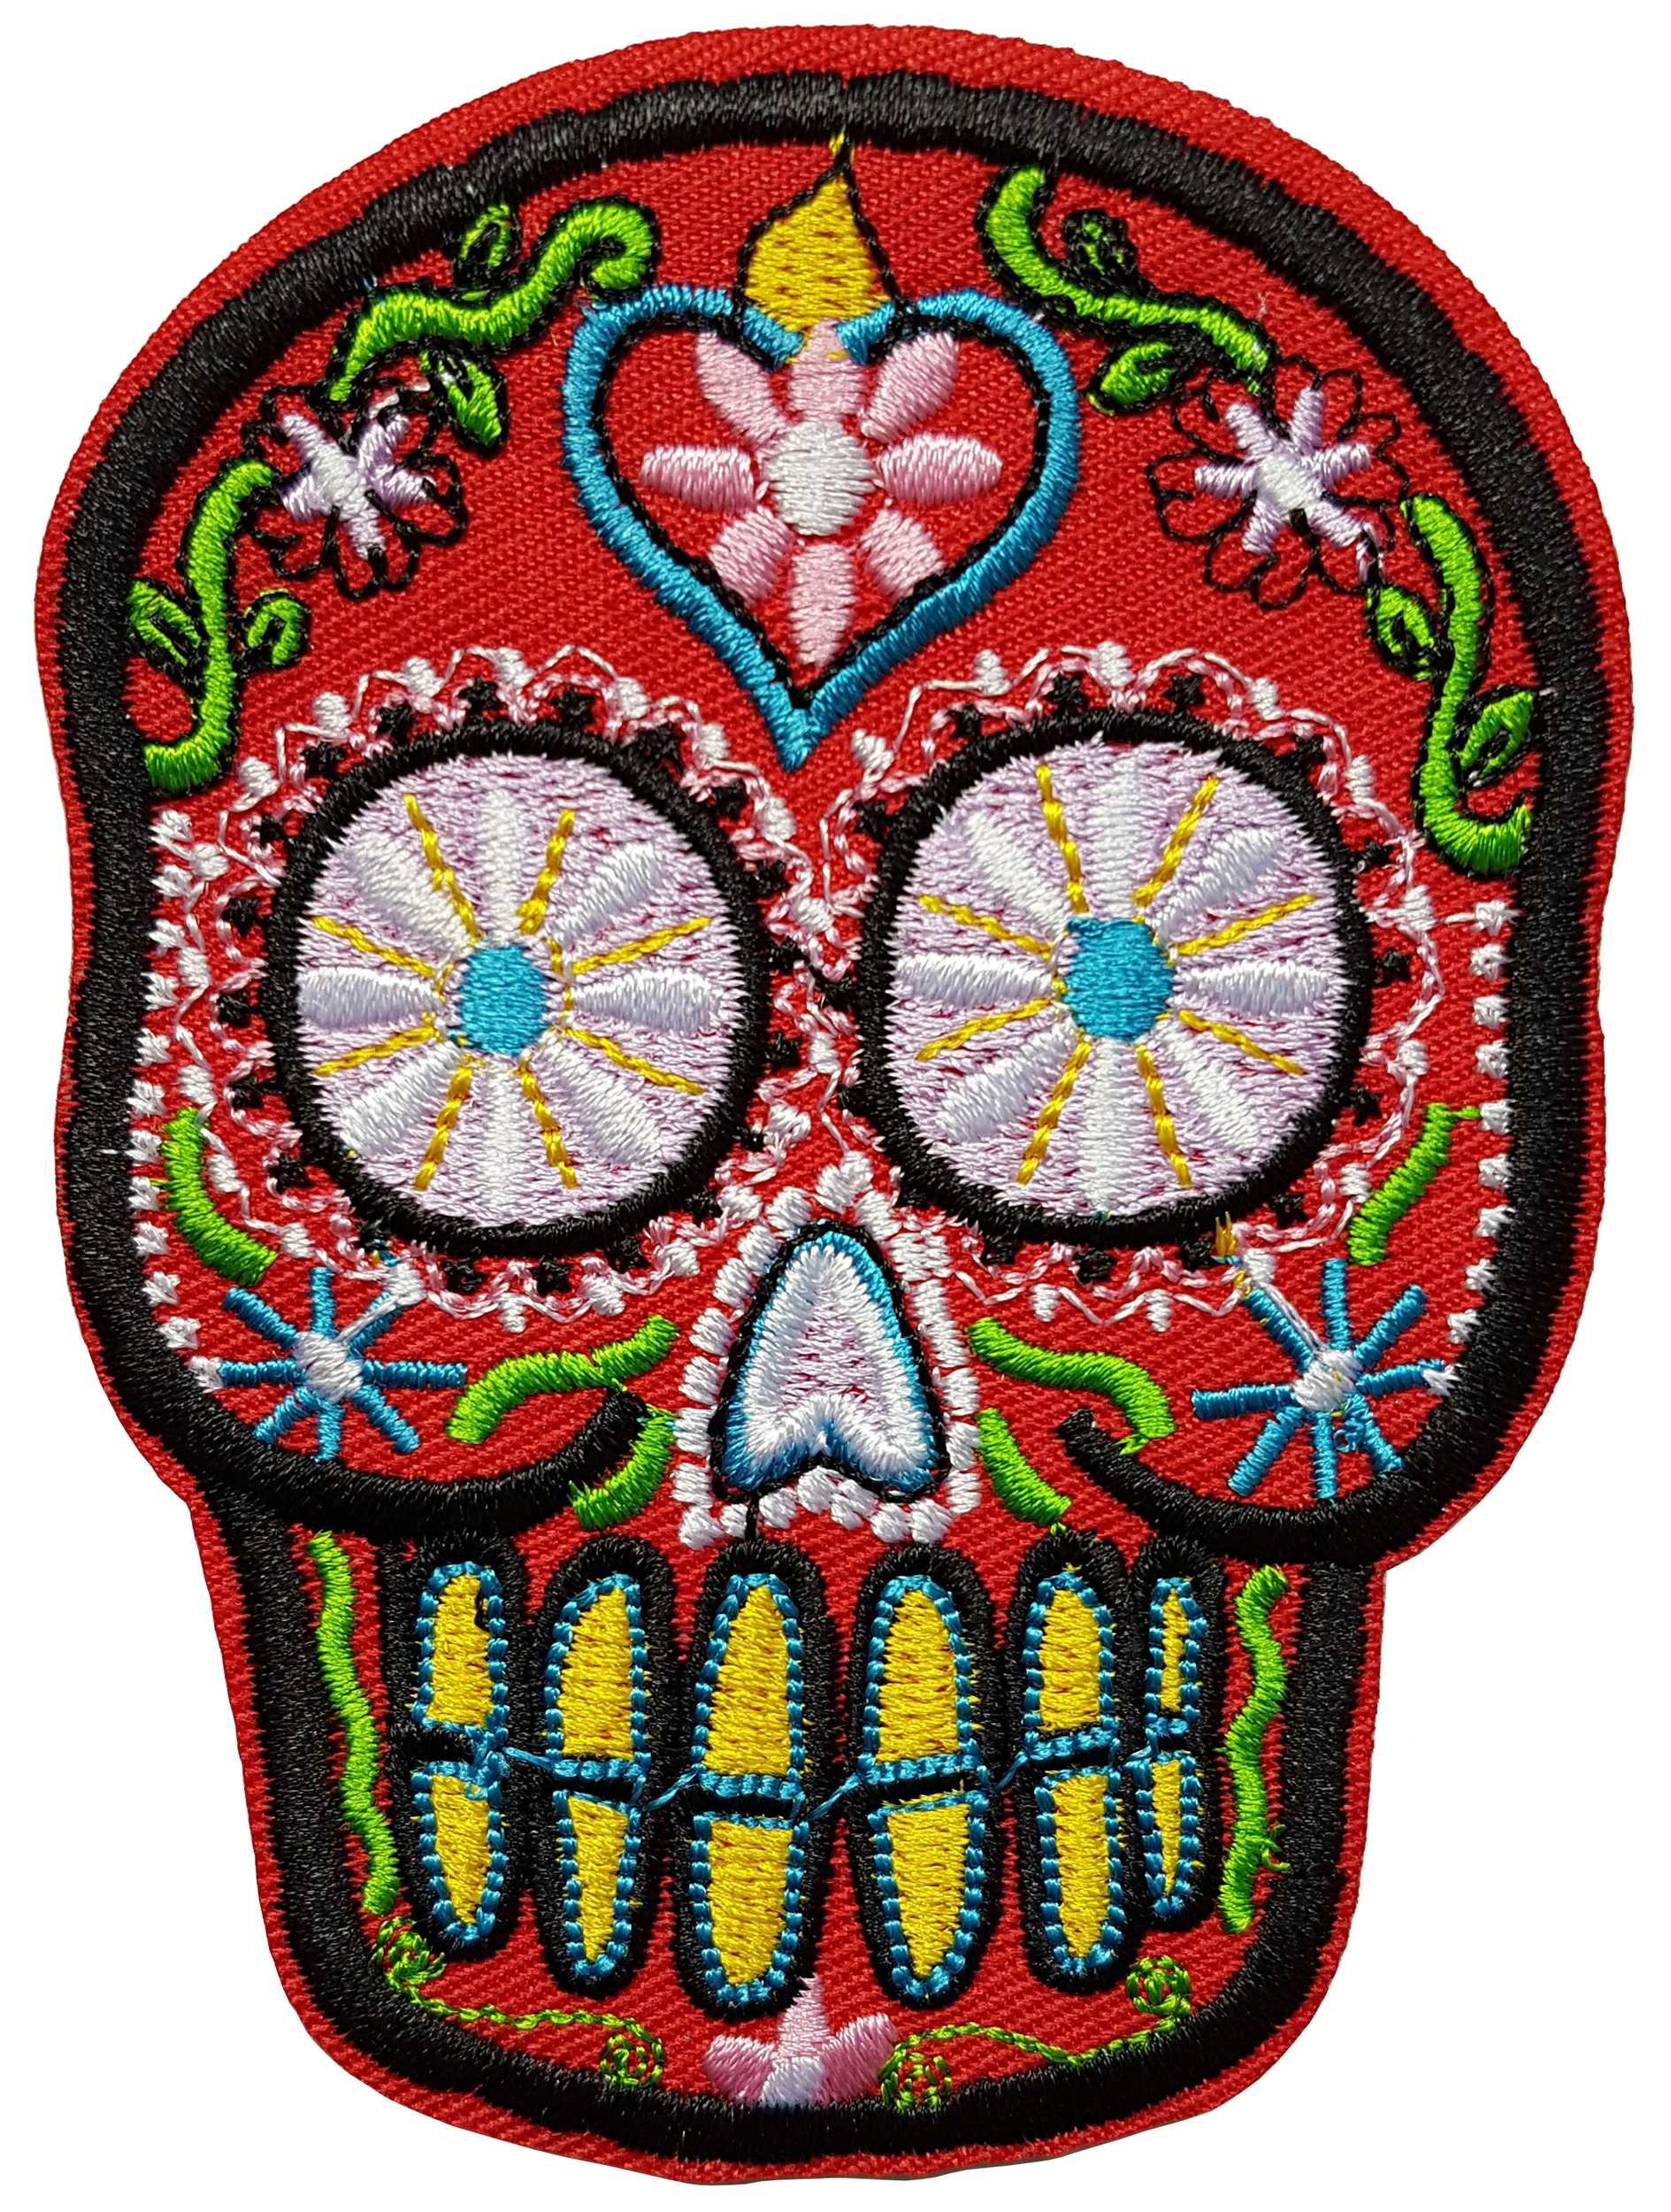 Patch Thermocollant Calavera Mexicain Rouge Yeux Fleurs